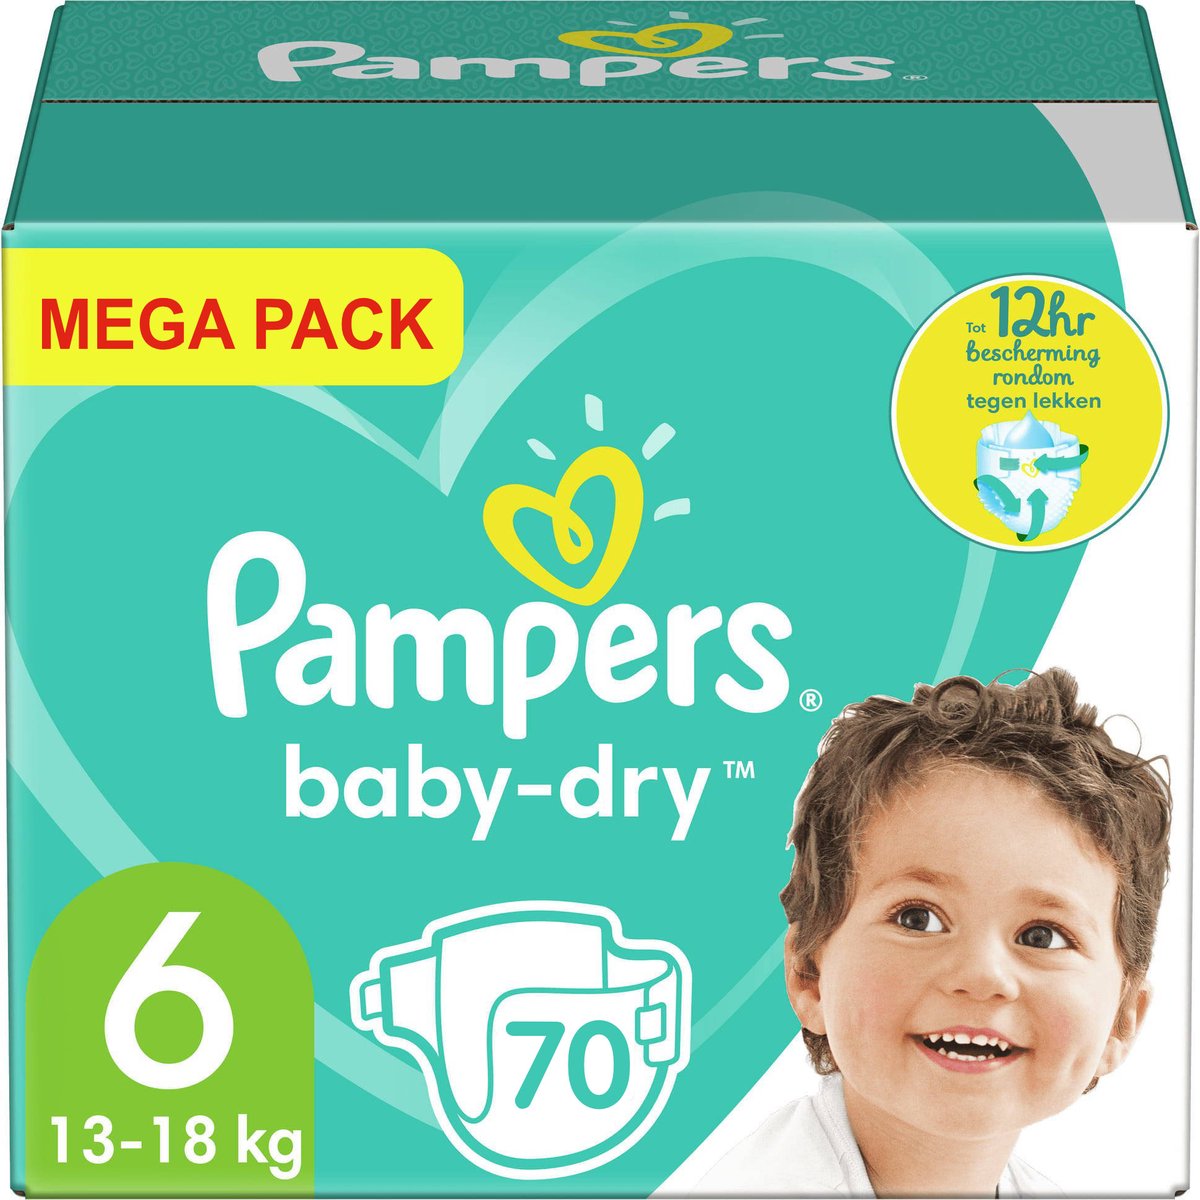 Pampers - Bébé Dry - Taille 6 - Mega Pack - 70 couches